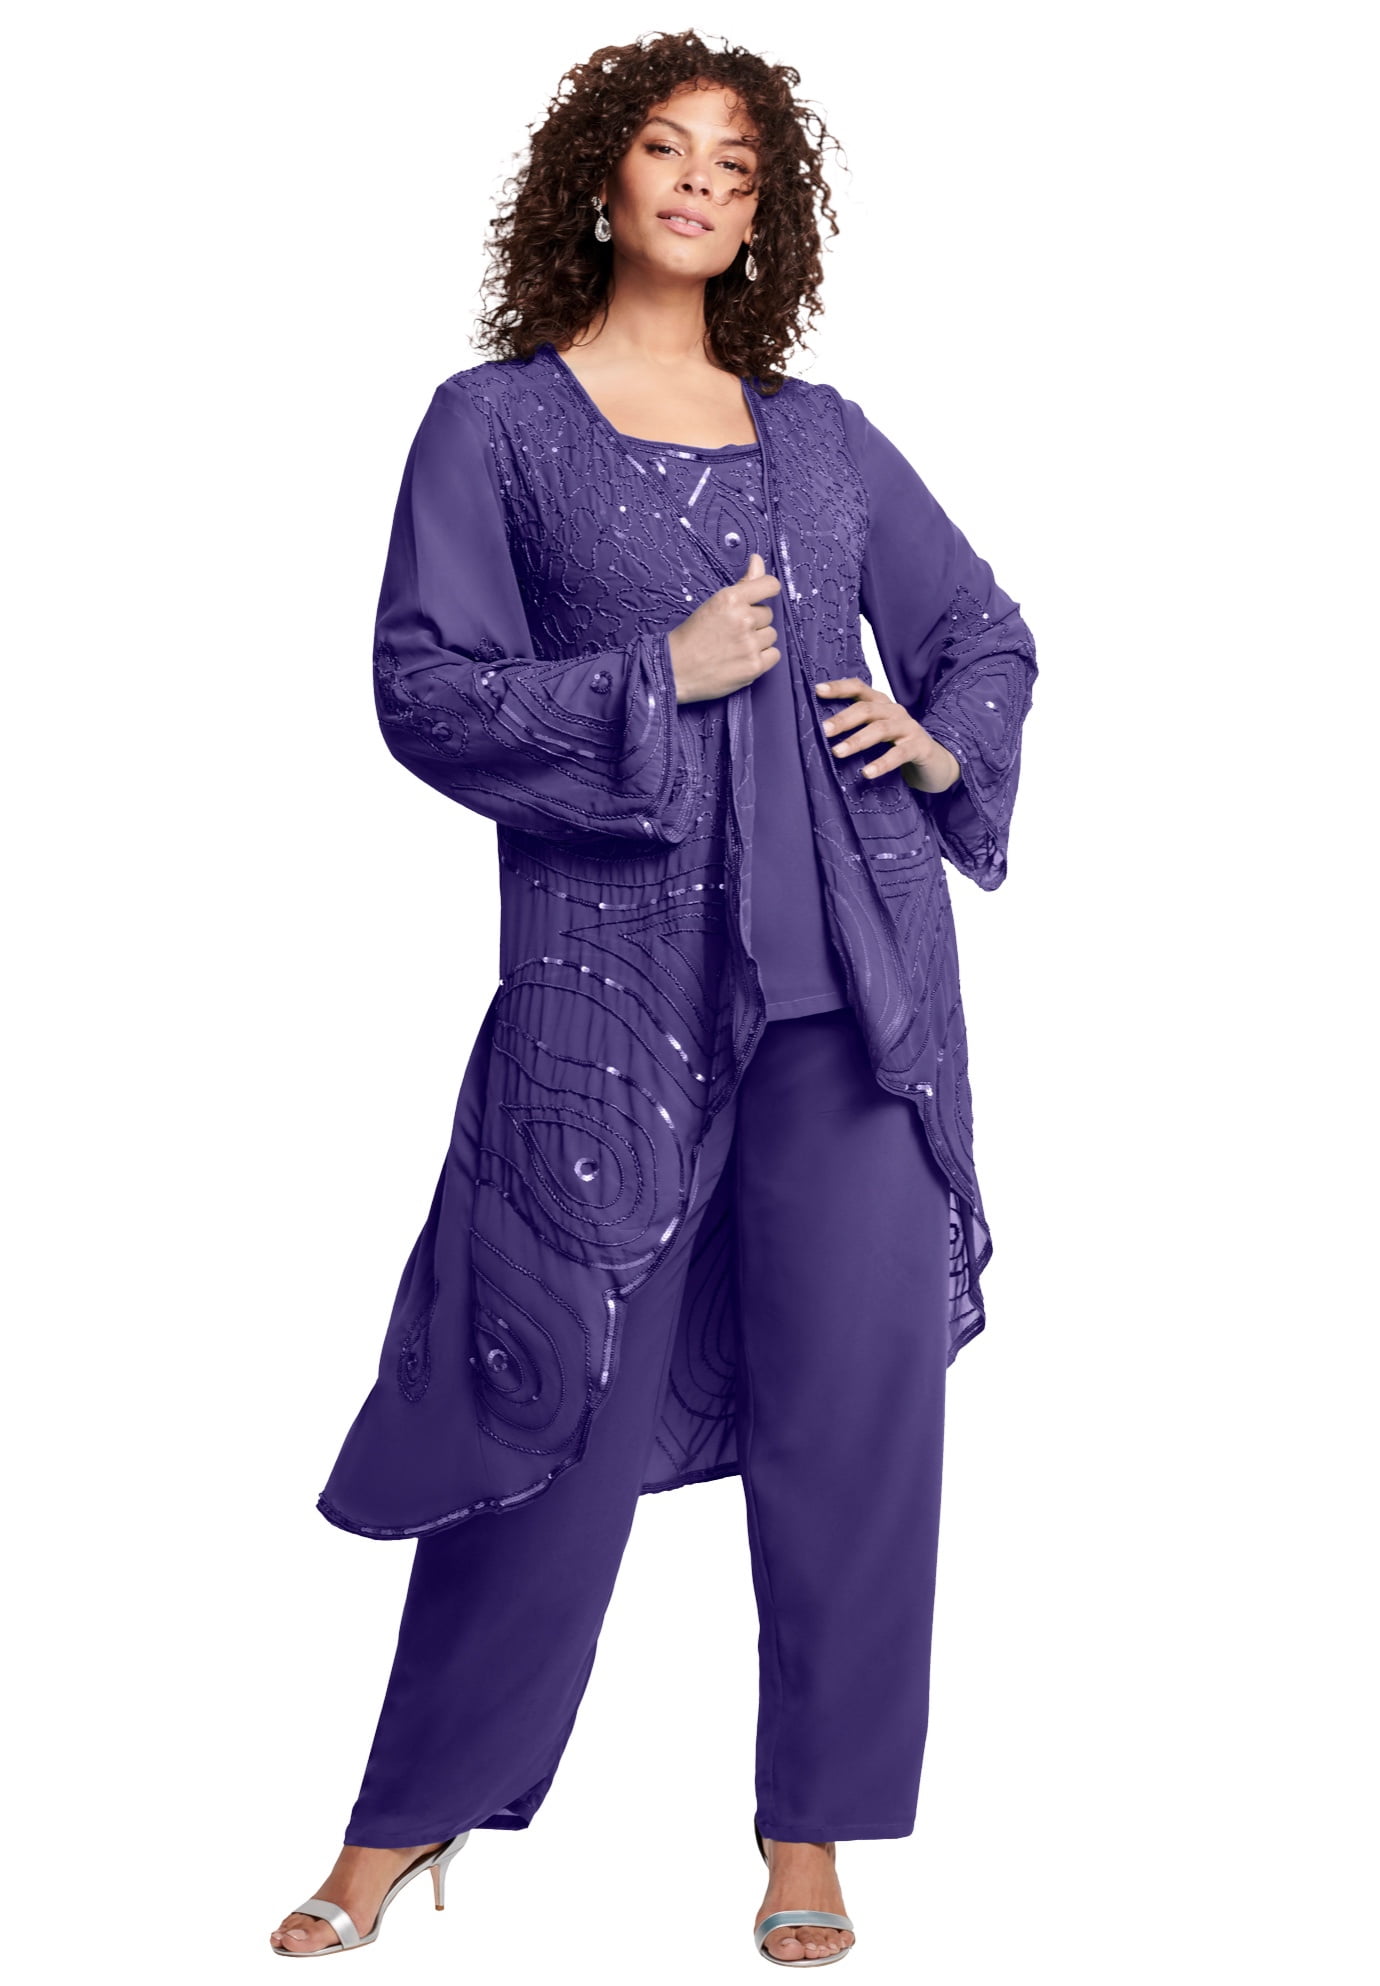 Mother Dressy, Pant Suits, Plus Size Wedding, Mothers, Wedding